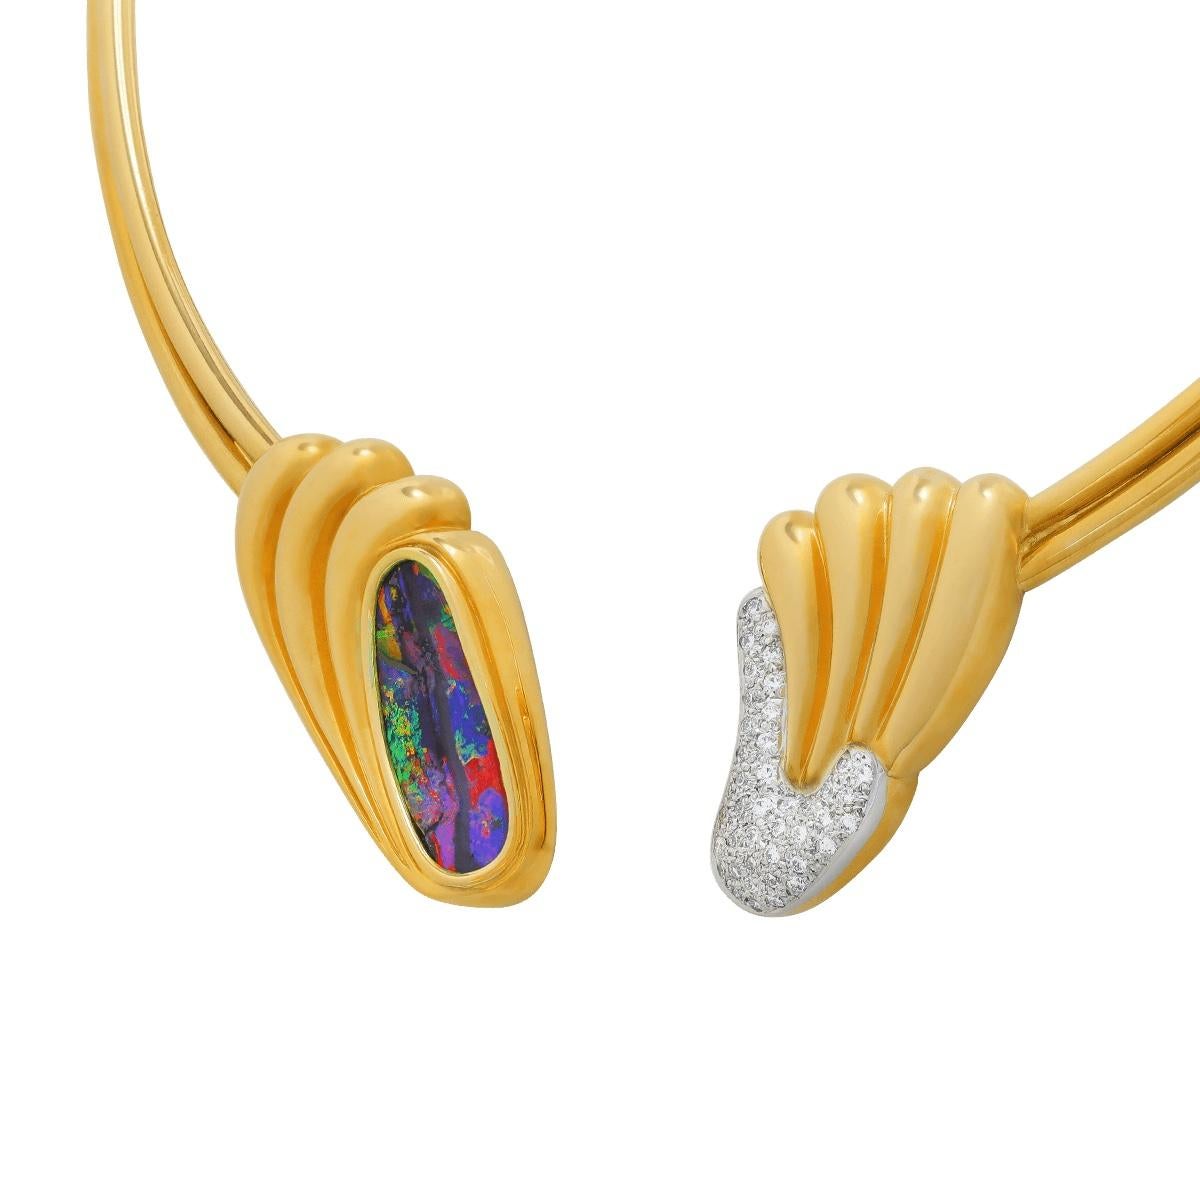 The rich, bright colours of this unbelievable black boulder opal are without compare. The purples and reds, greens and pinks, it has every desired colour, and they are vivid. Set in a unique collier of 18K solid gold and high jewellery grade